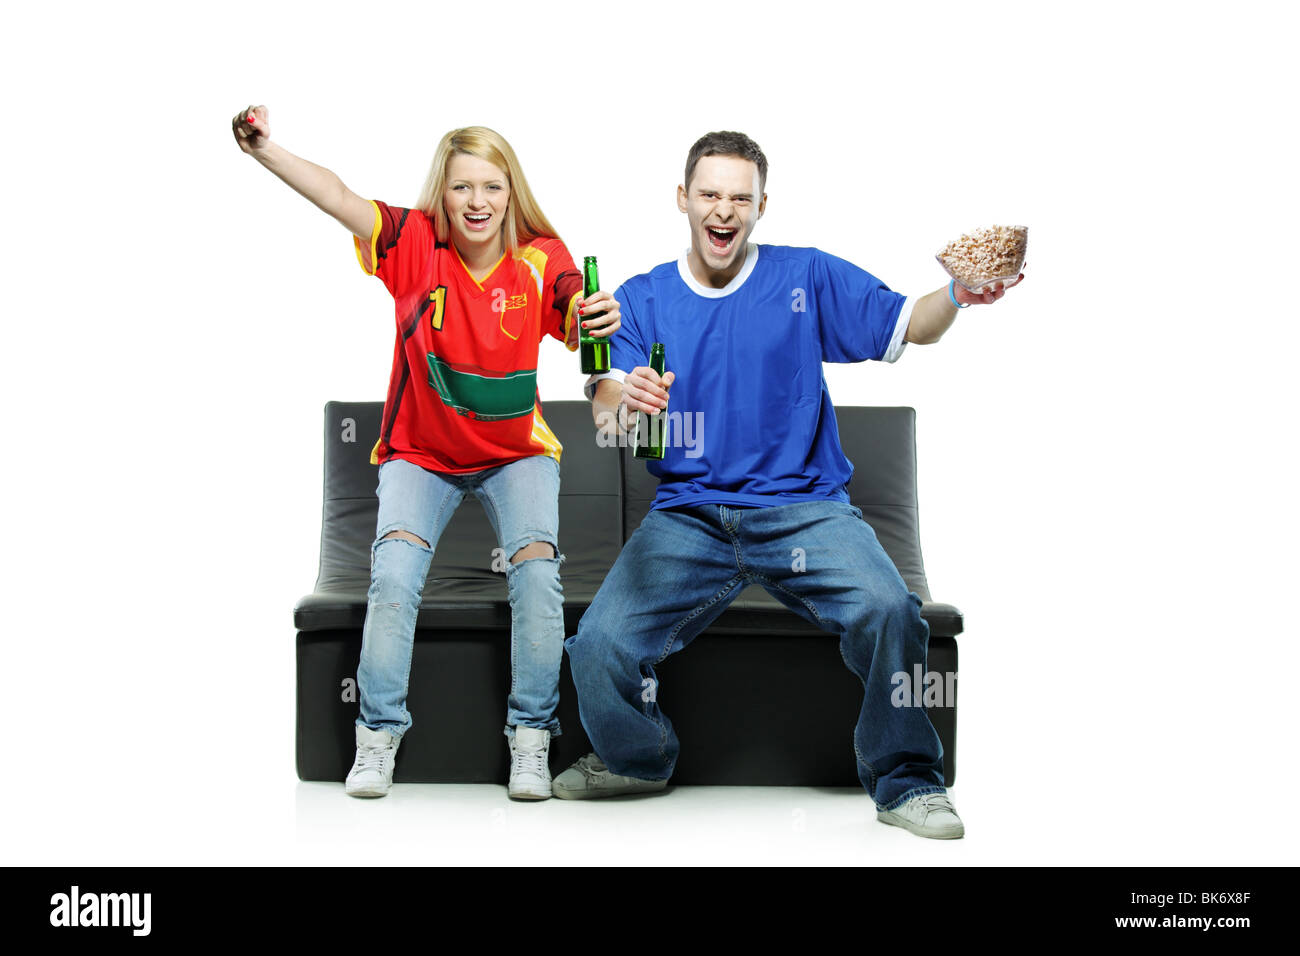 Excited man and woman watching sport isolated on white background Stock Photo